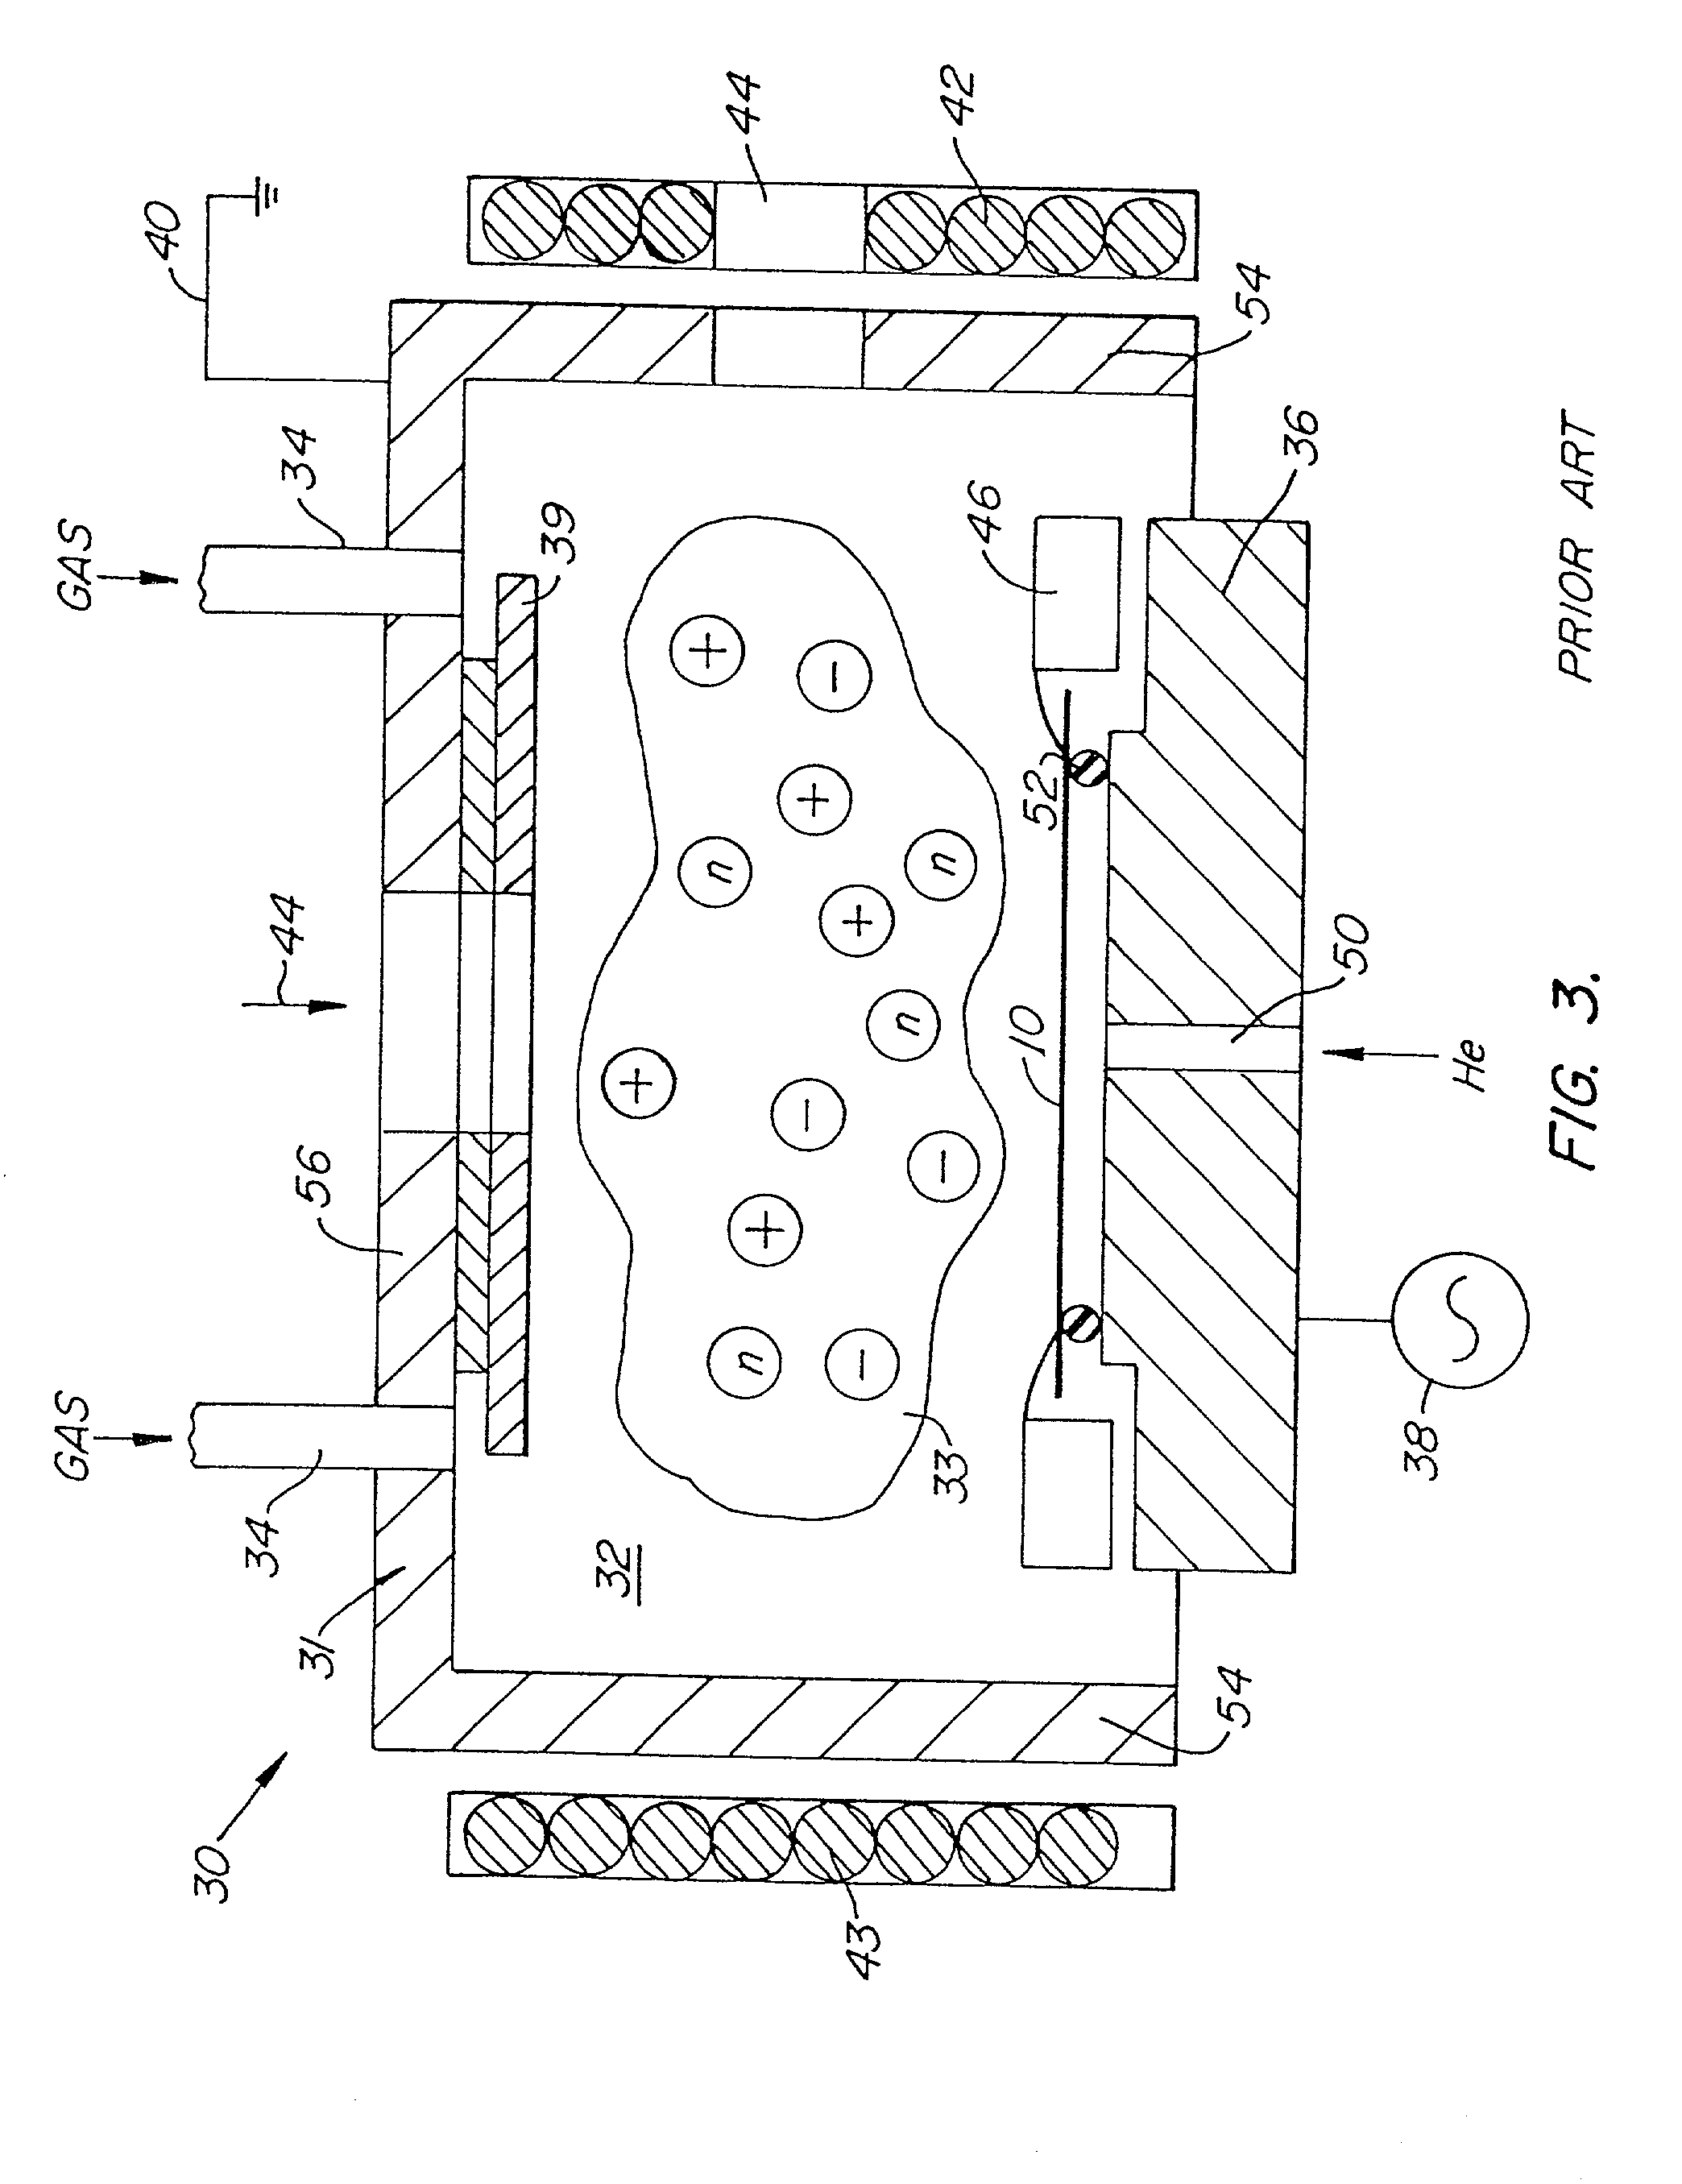 Masking methods and etching sequences for patterning electrodes of high density RAM capacitors